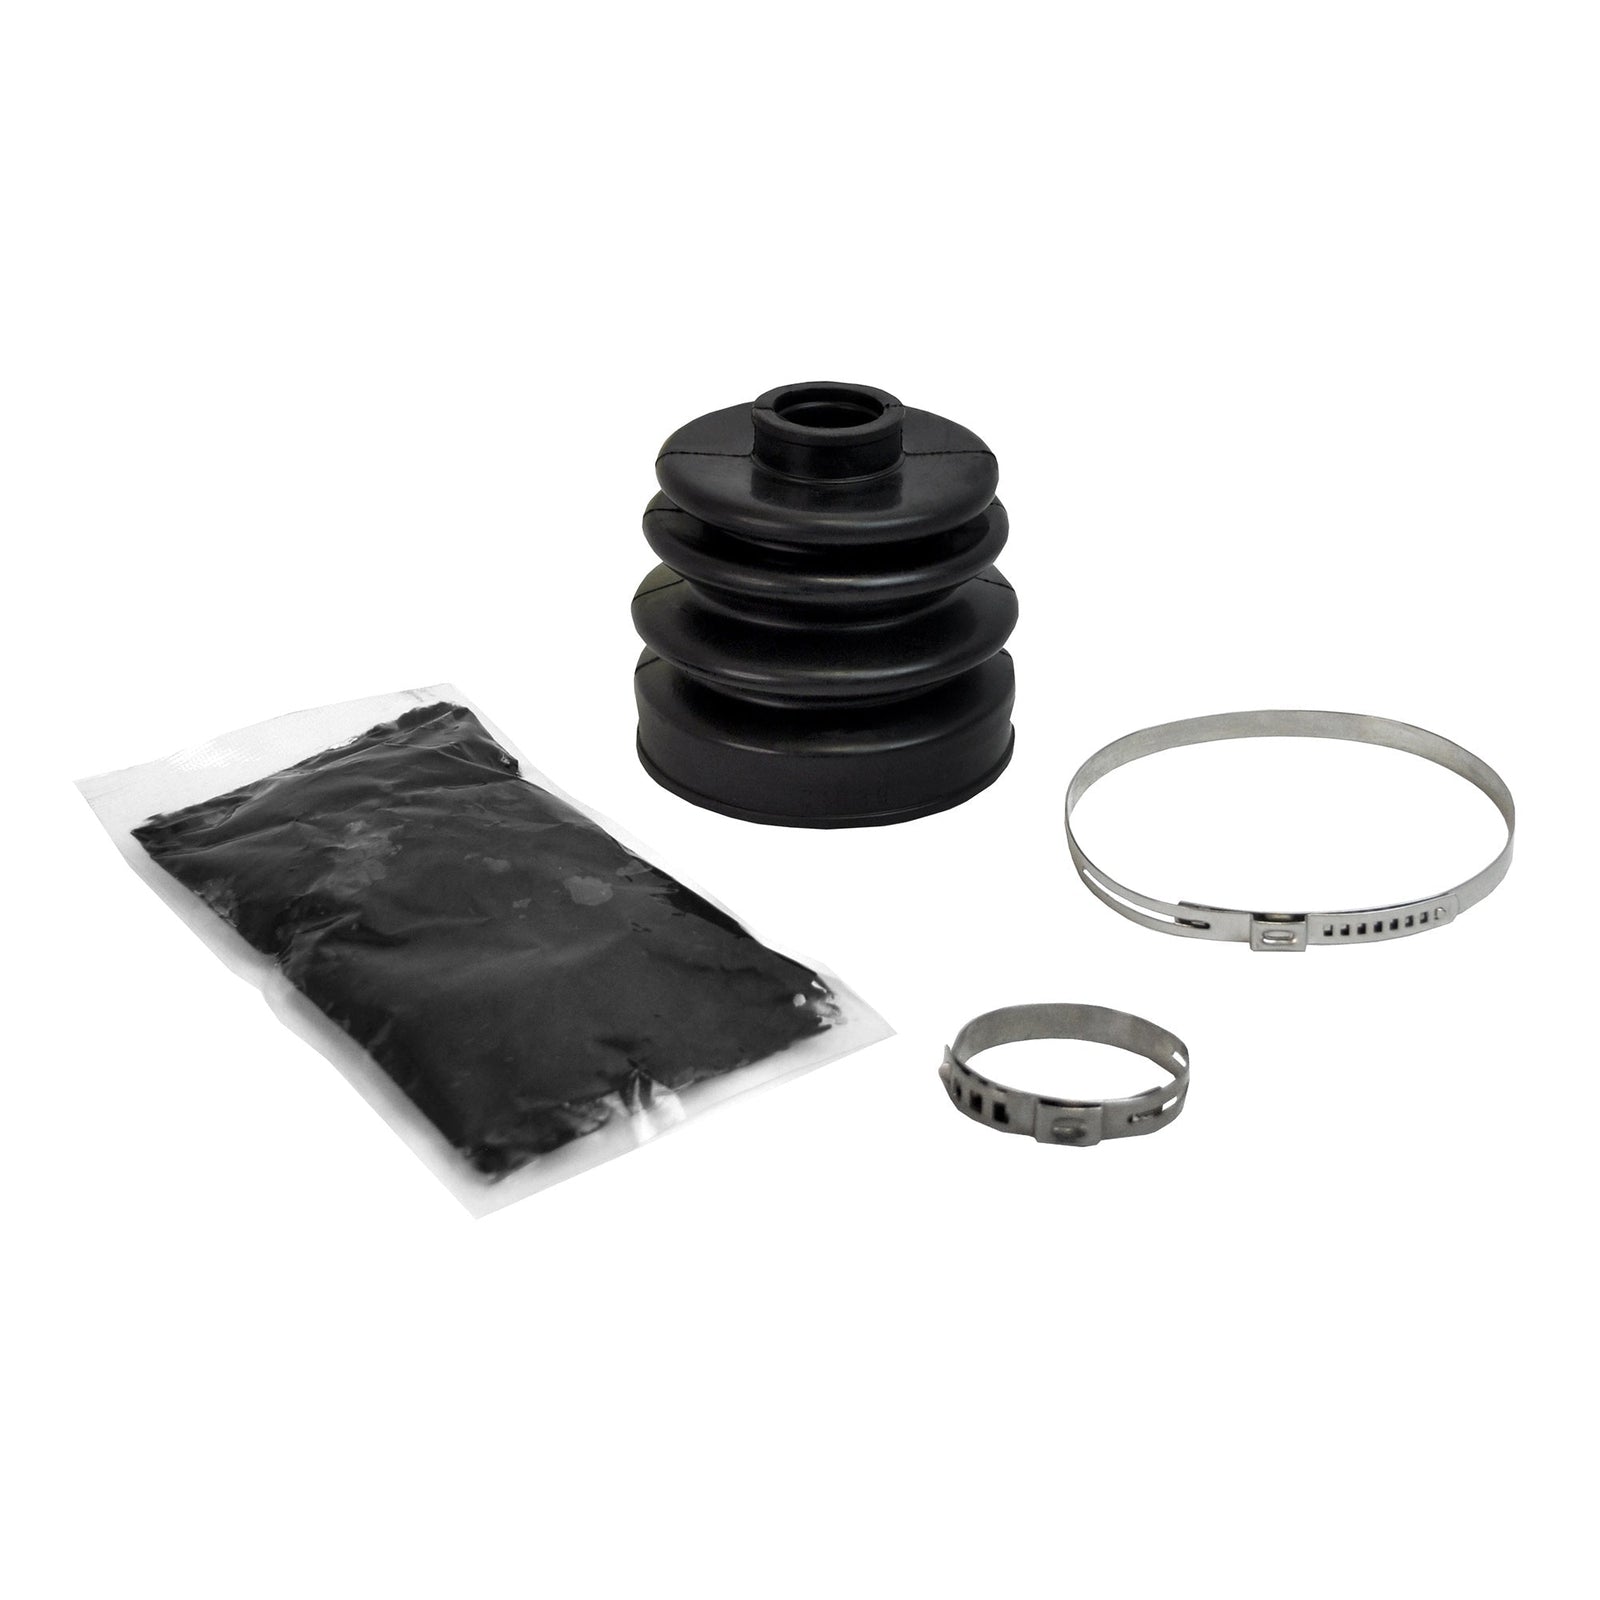 Polaris RZR 800 Rugged OE Replacement Boot Kit